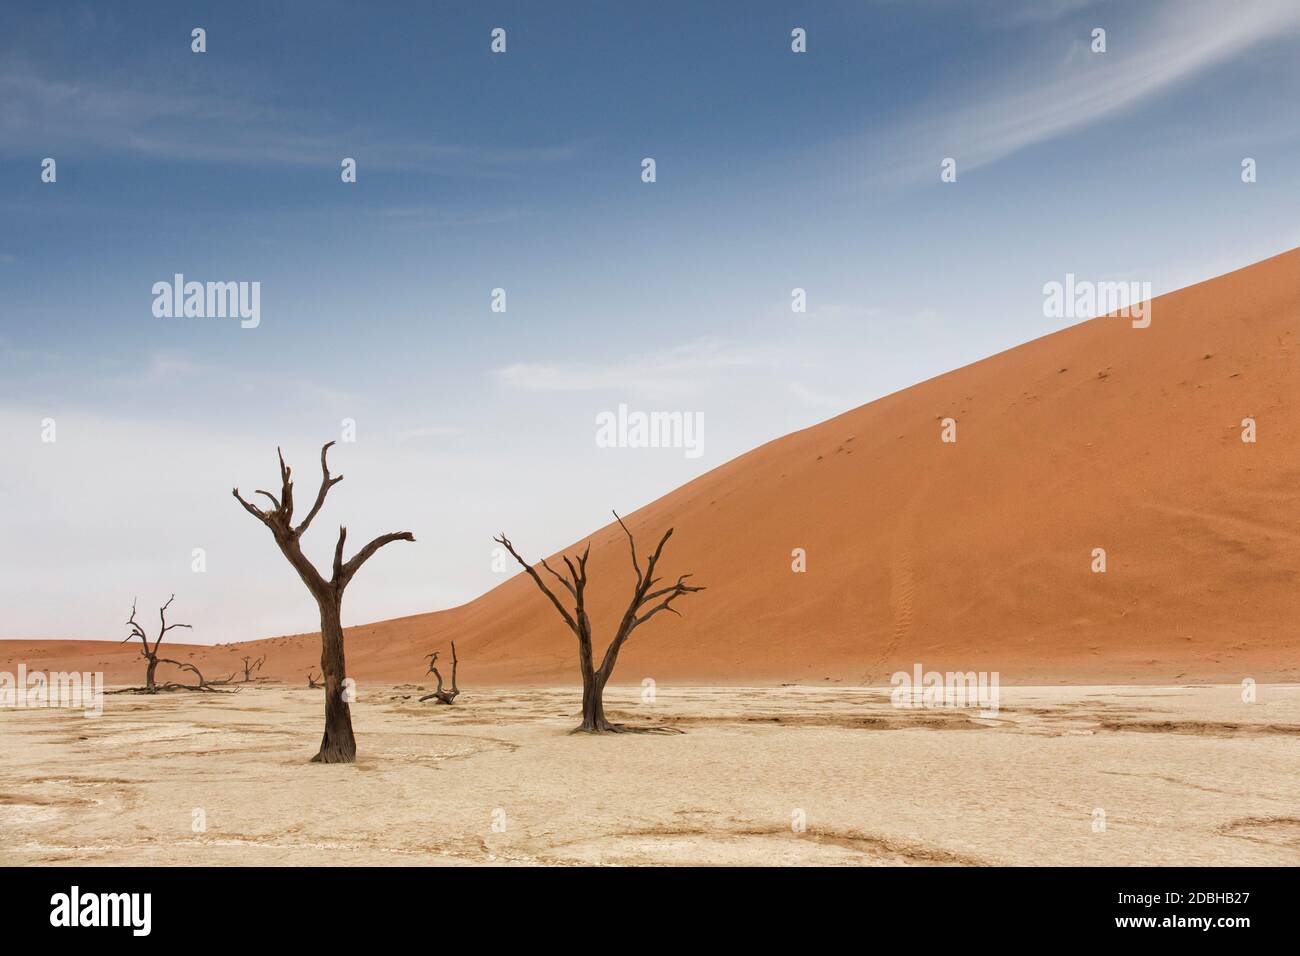 Deadvlei is a white clay pan located near the more famous salt pan of Sossusvlei, inside the Namib-Naukluft Park in Namibia. Also written DeadVlei or Stock Photo